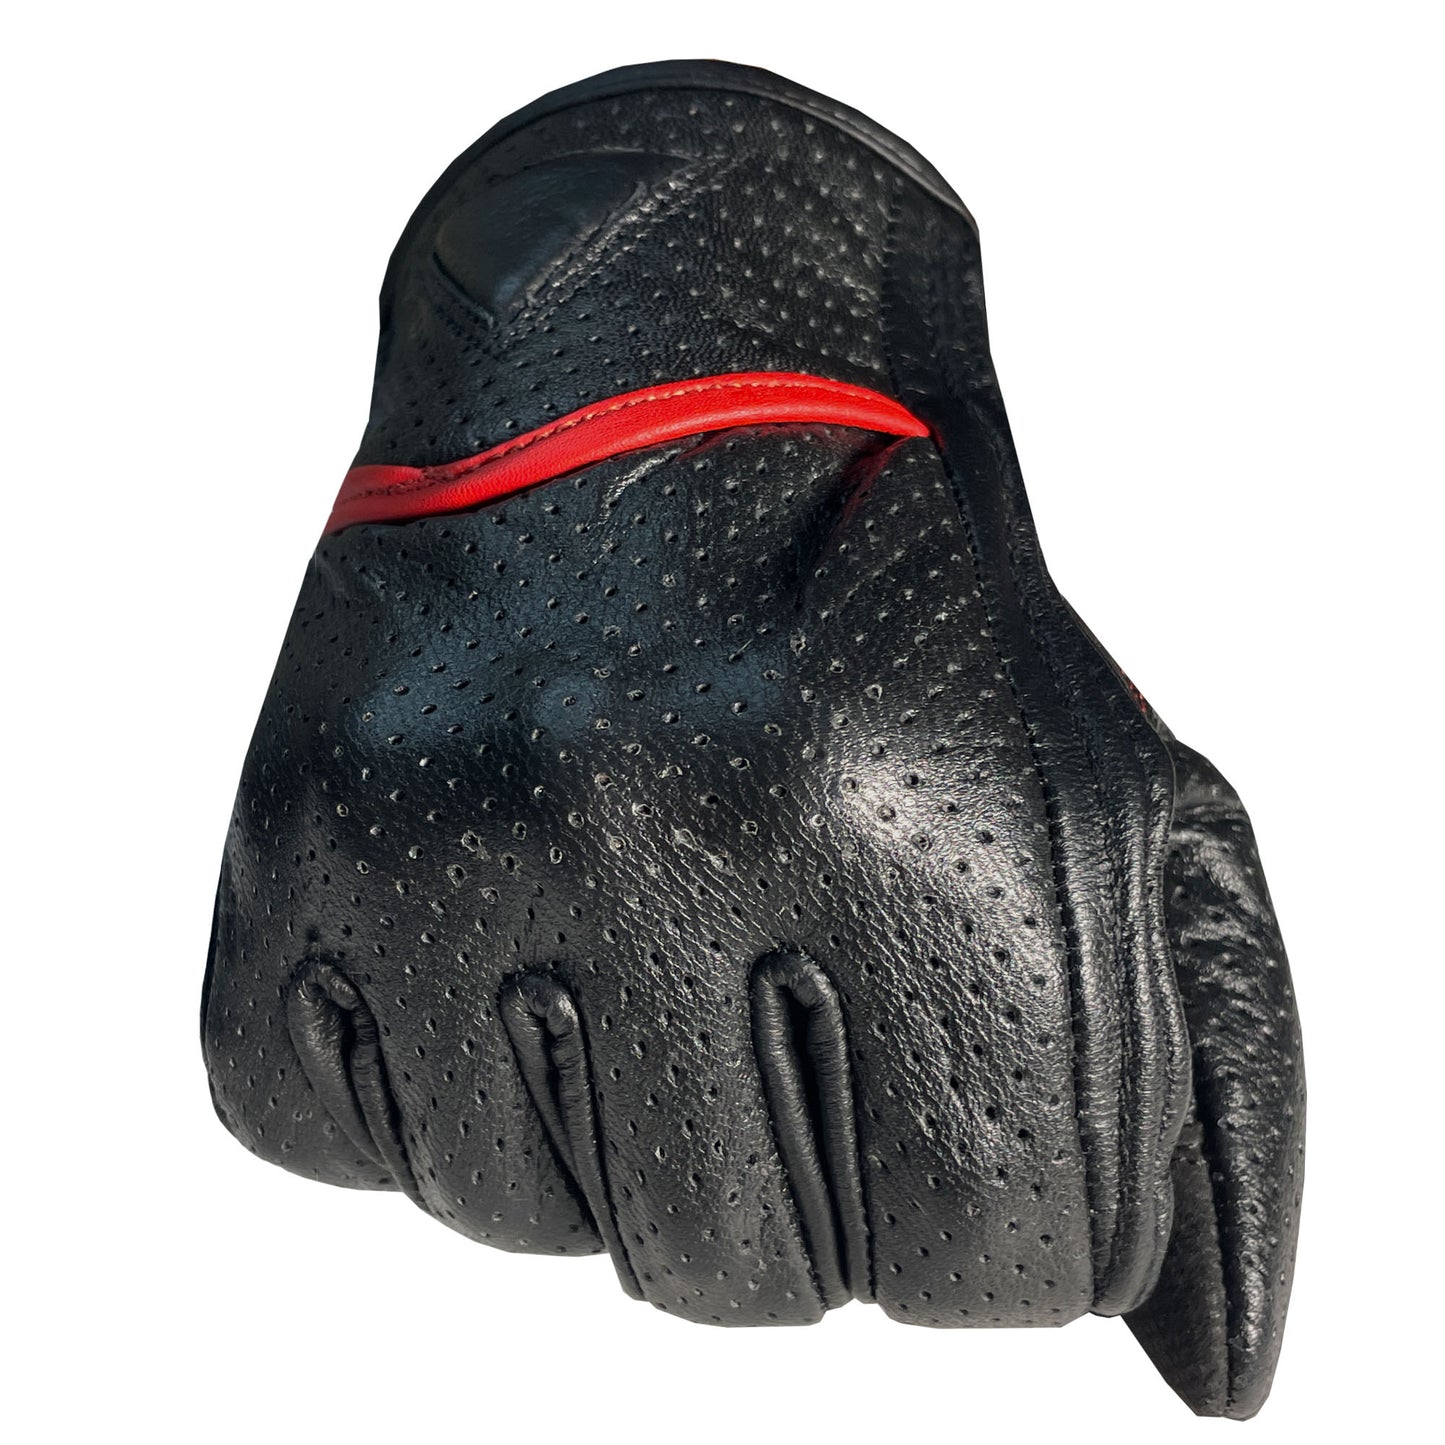 Motorcycle Bicycle Riding Racing Bike Protective Armor Gel Leather Gloves BlackRed